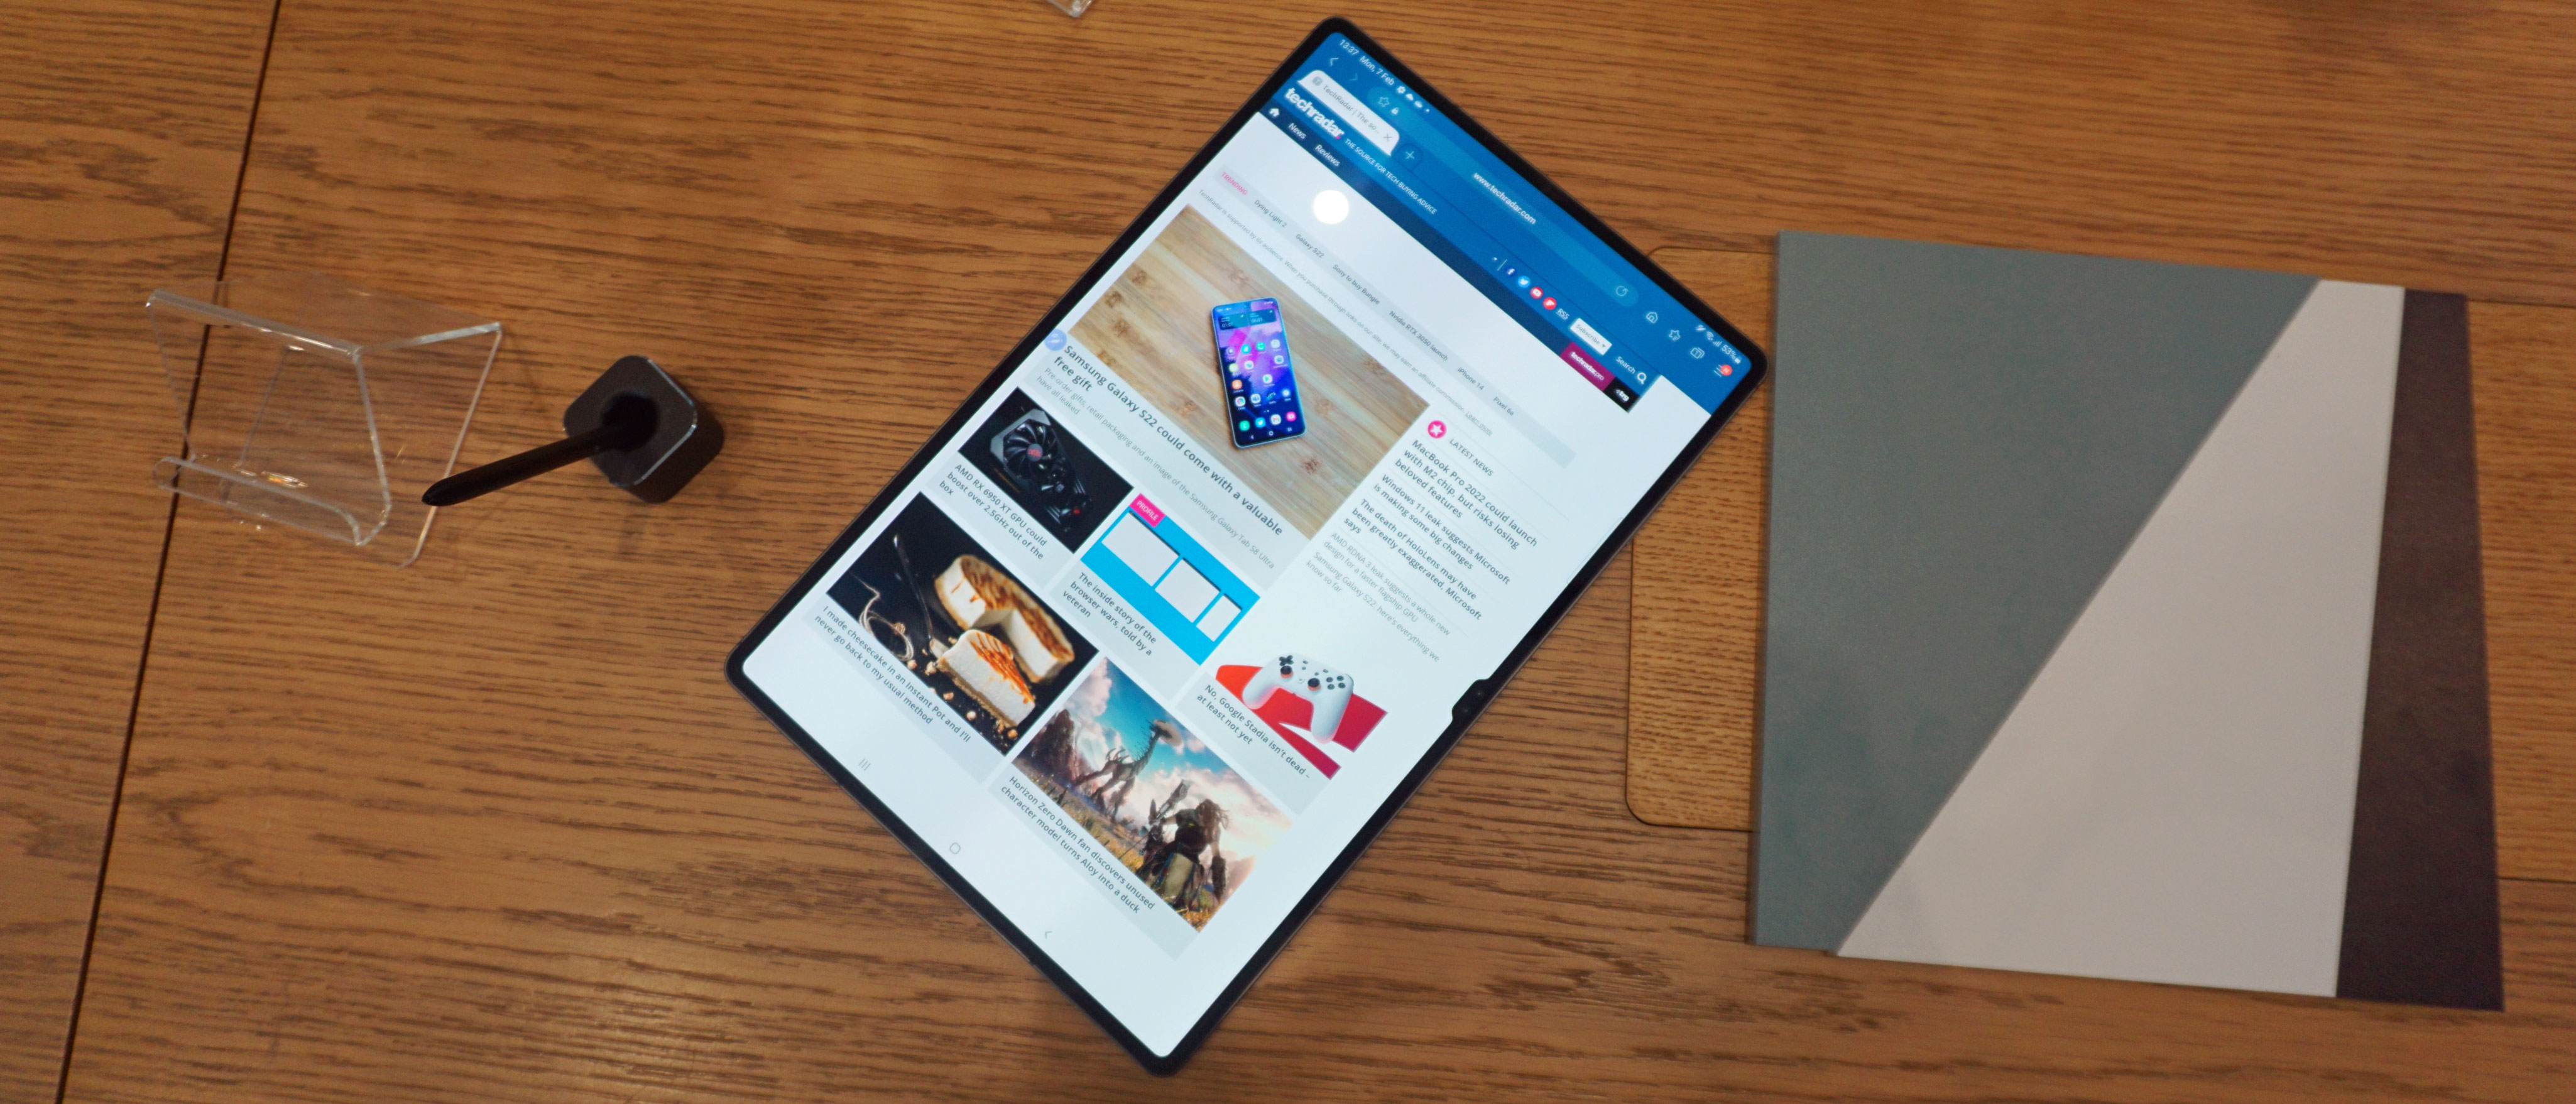 Samsung Galaxy Tab S8 Ultra: a gigantic Android tablet that'll prove  divisive | TechRadar